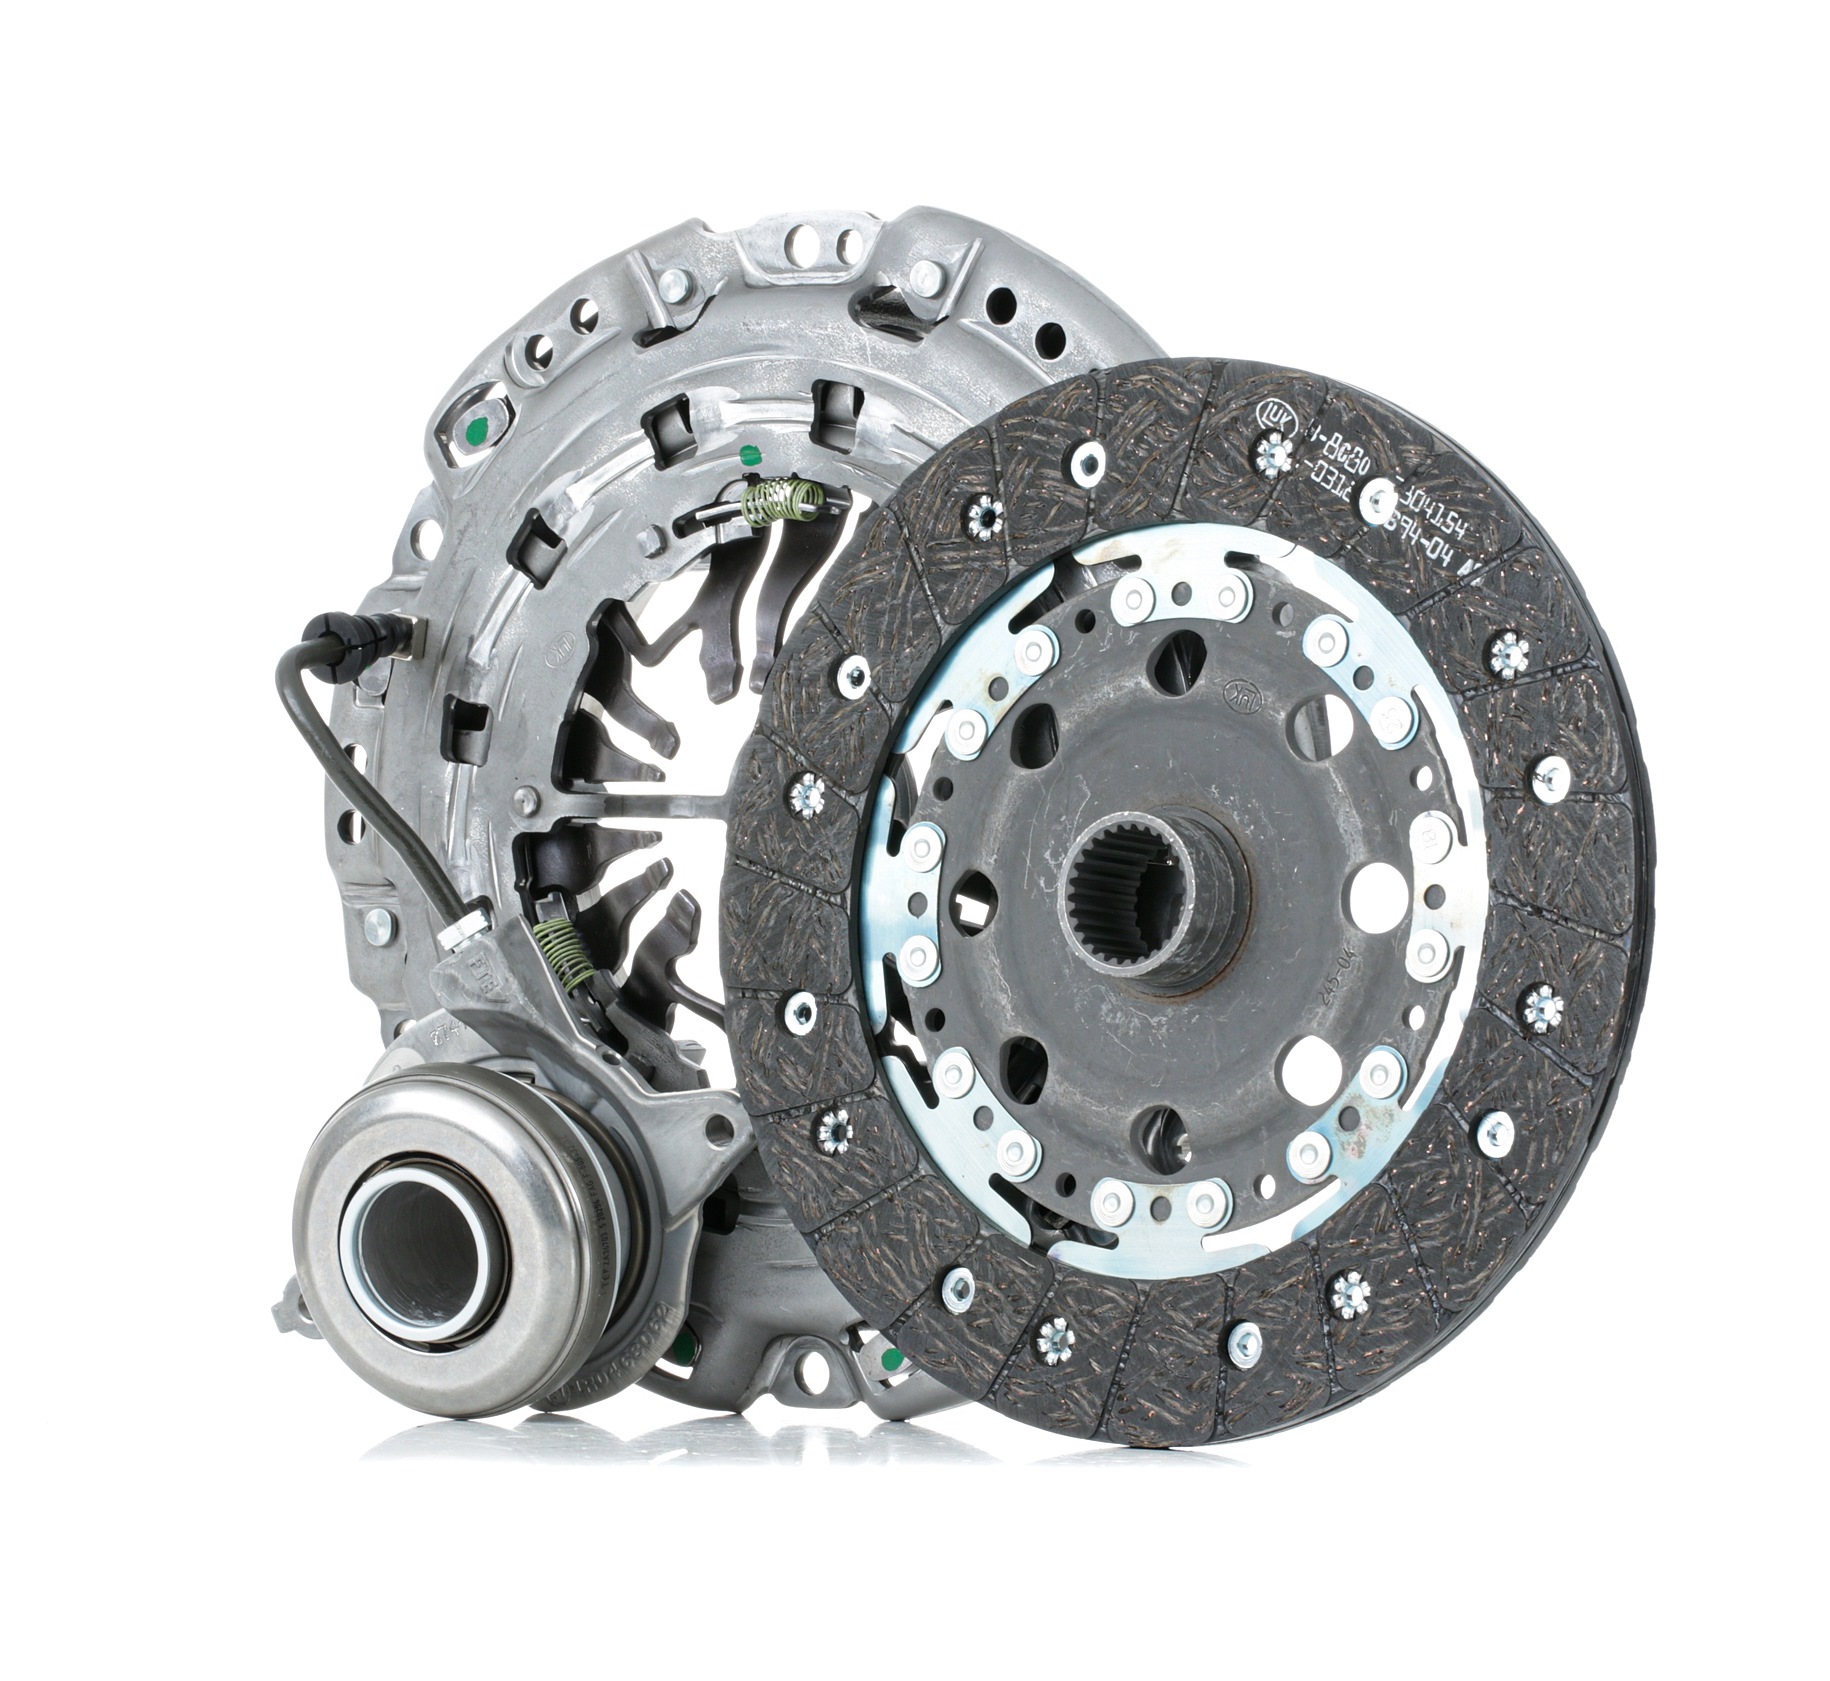 LuK for engines with dual-mass flywheel, with central slave cylinder, Requires special tools for mounting, Check and replace dual-mass flywheel if necessary., with automatic adjustment, 230mm Ø: 230mm Clutch replacement kit 623 3216 34 buy